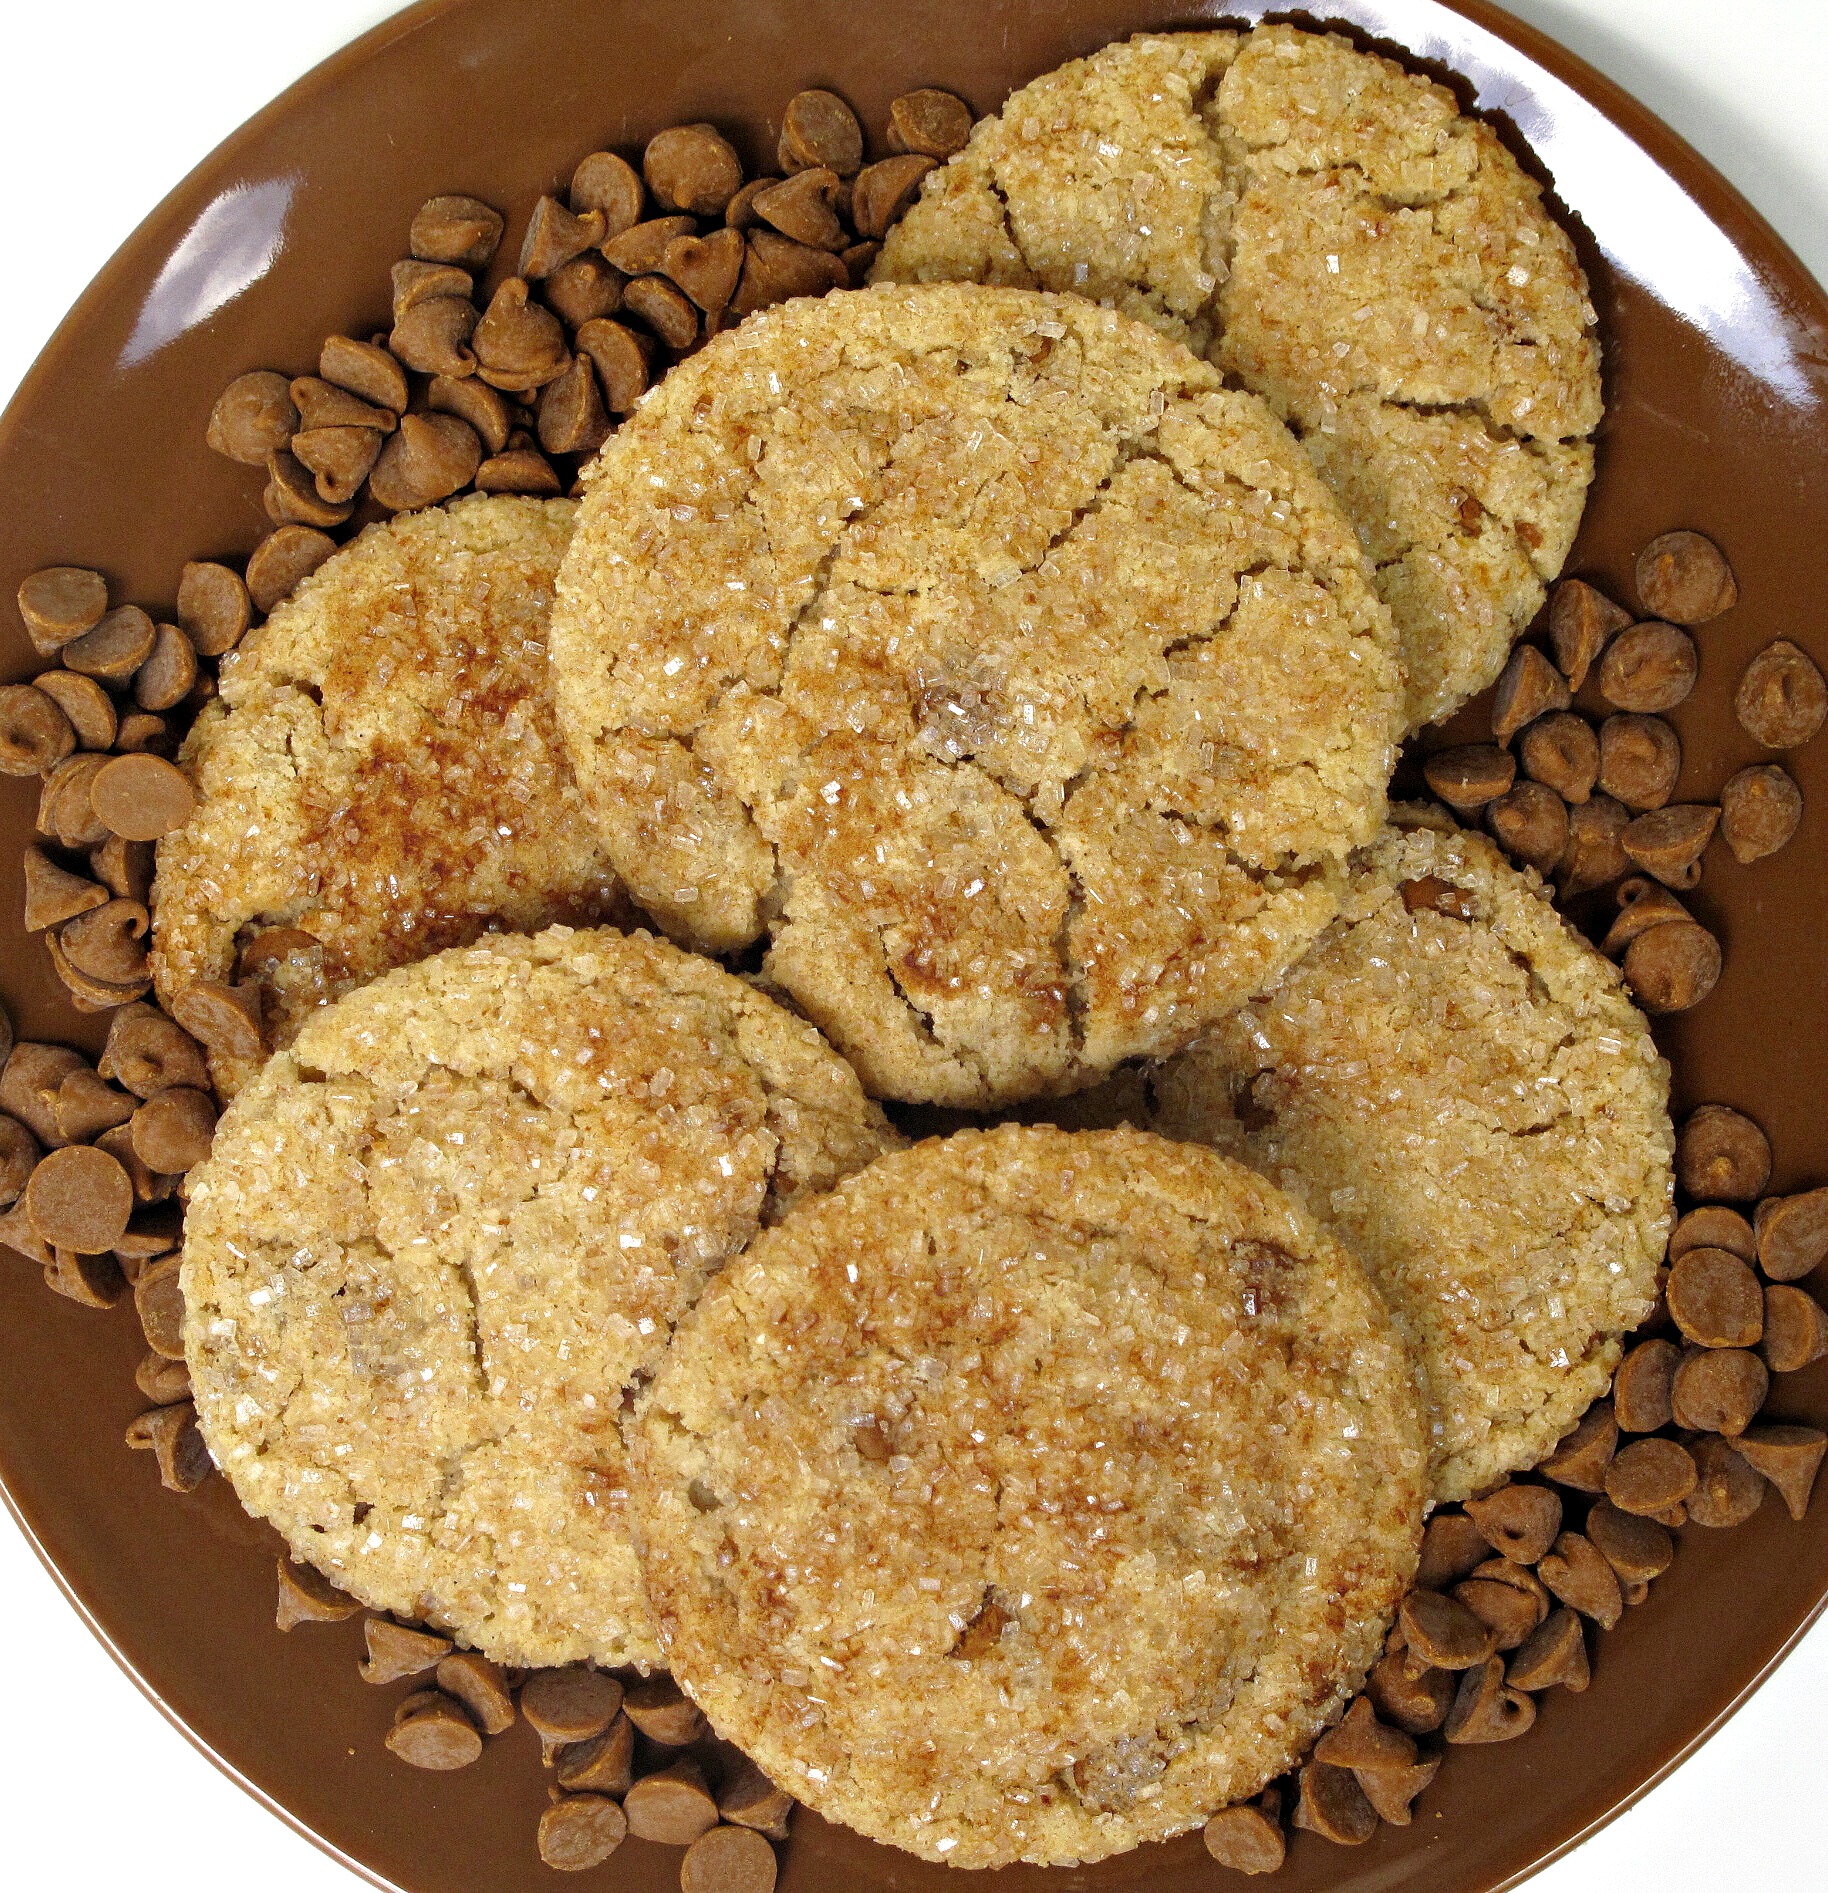 Cookies with a crackled surface coated in sparkling sugar on a plate with cinnamon baking chips.